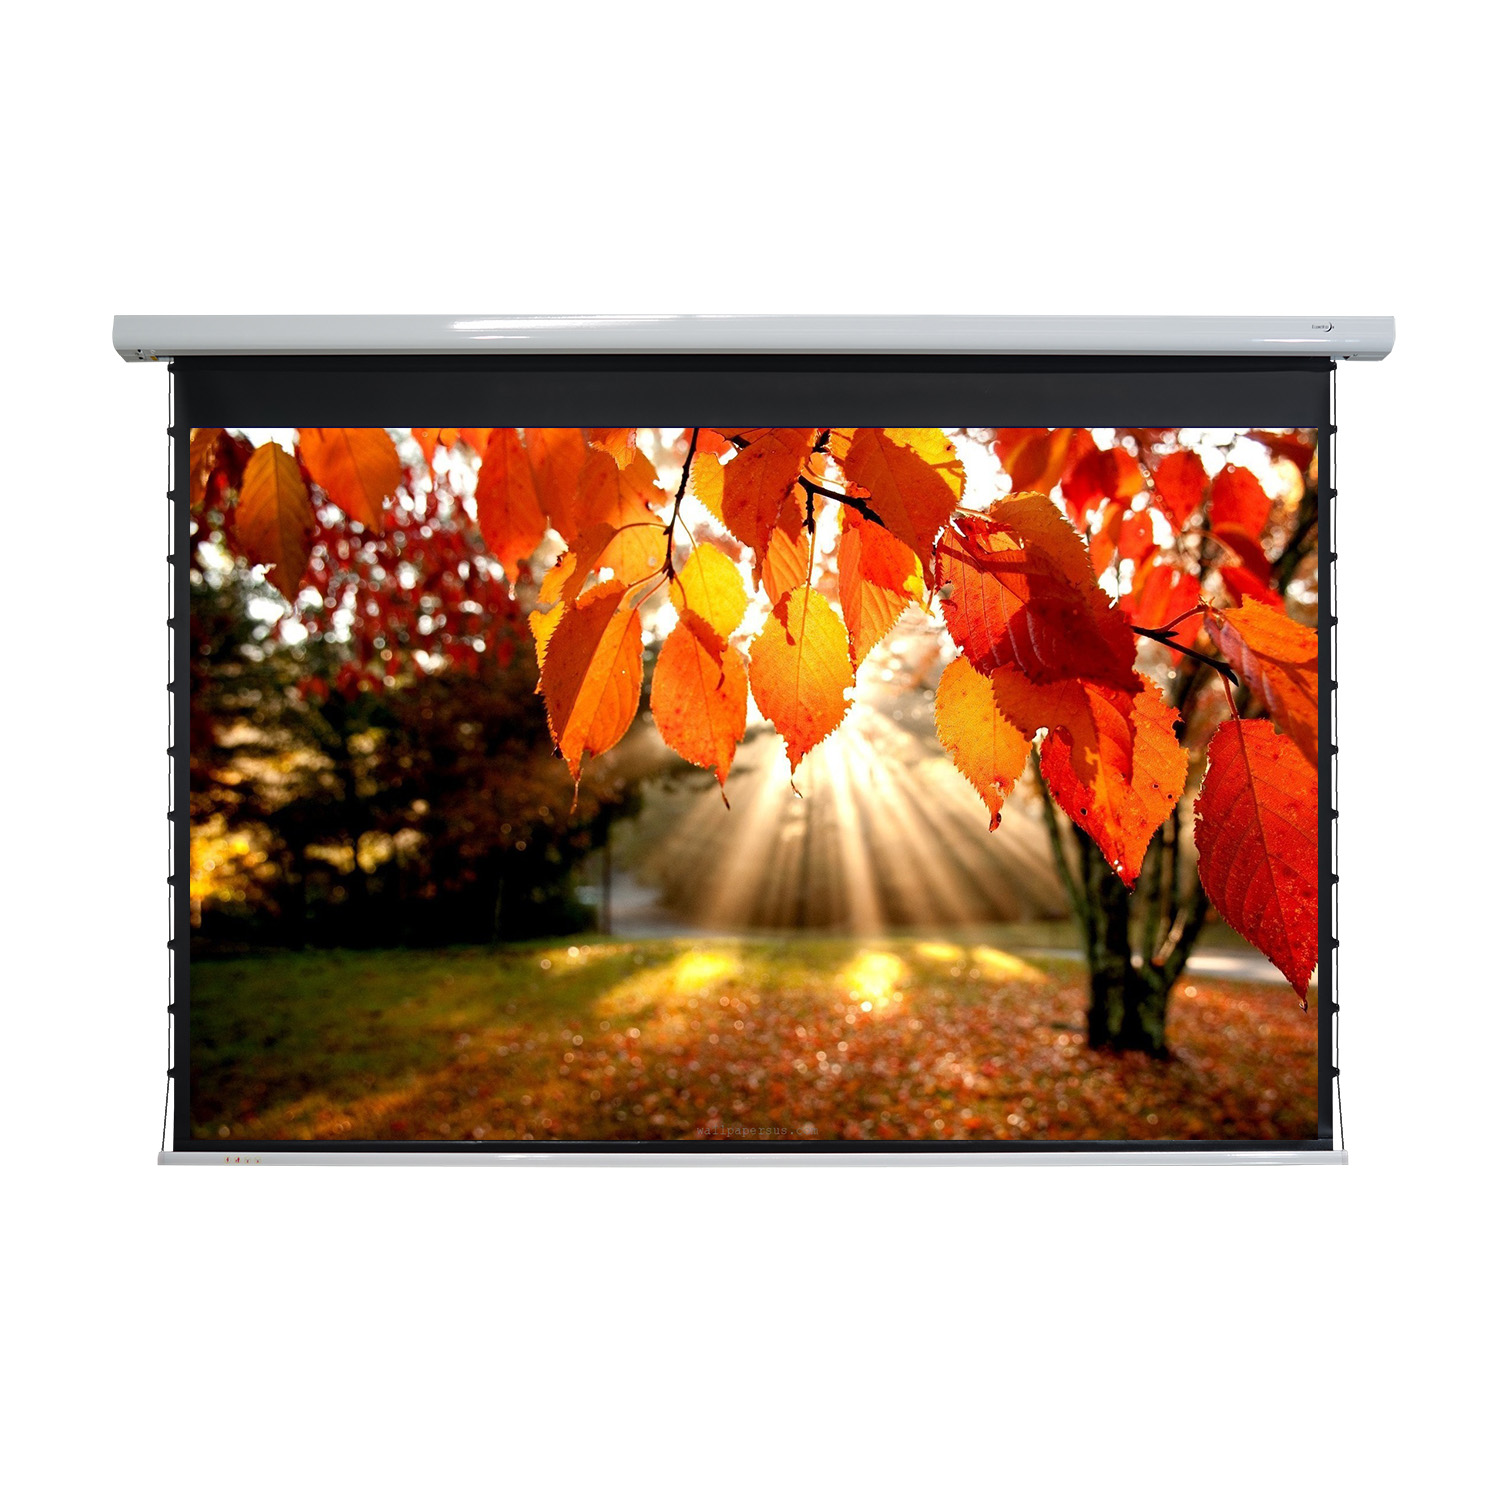 Elunevision 120" 16:9 Titan Tab-Tensioned Motorized Projector Screen